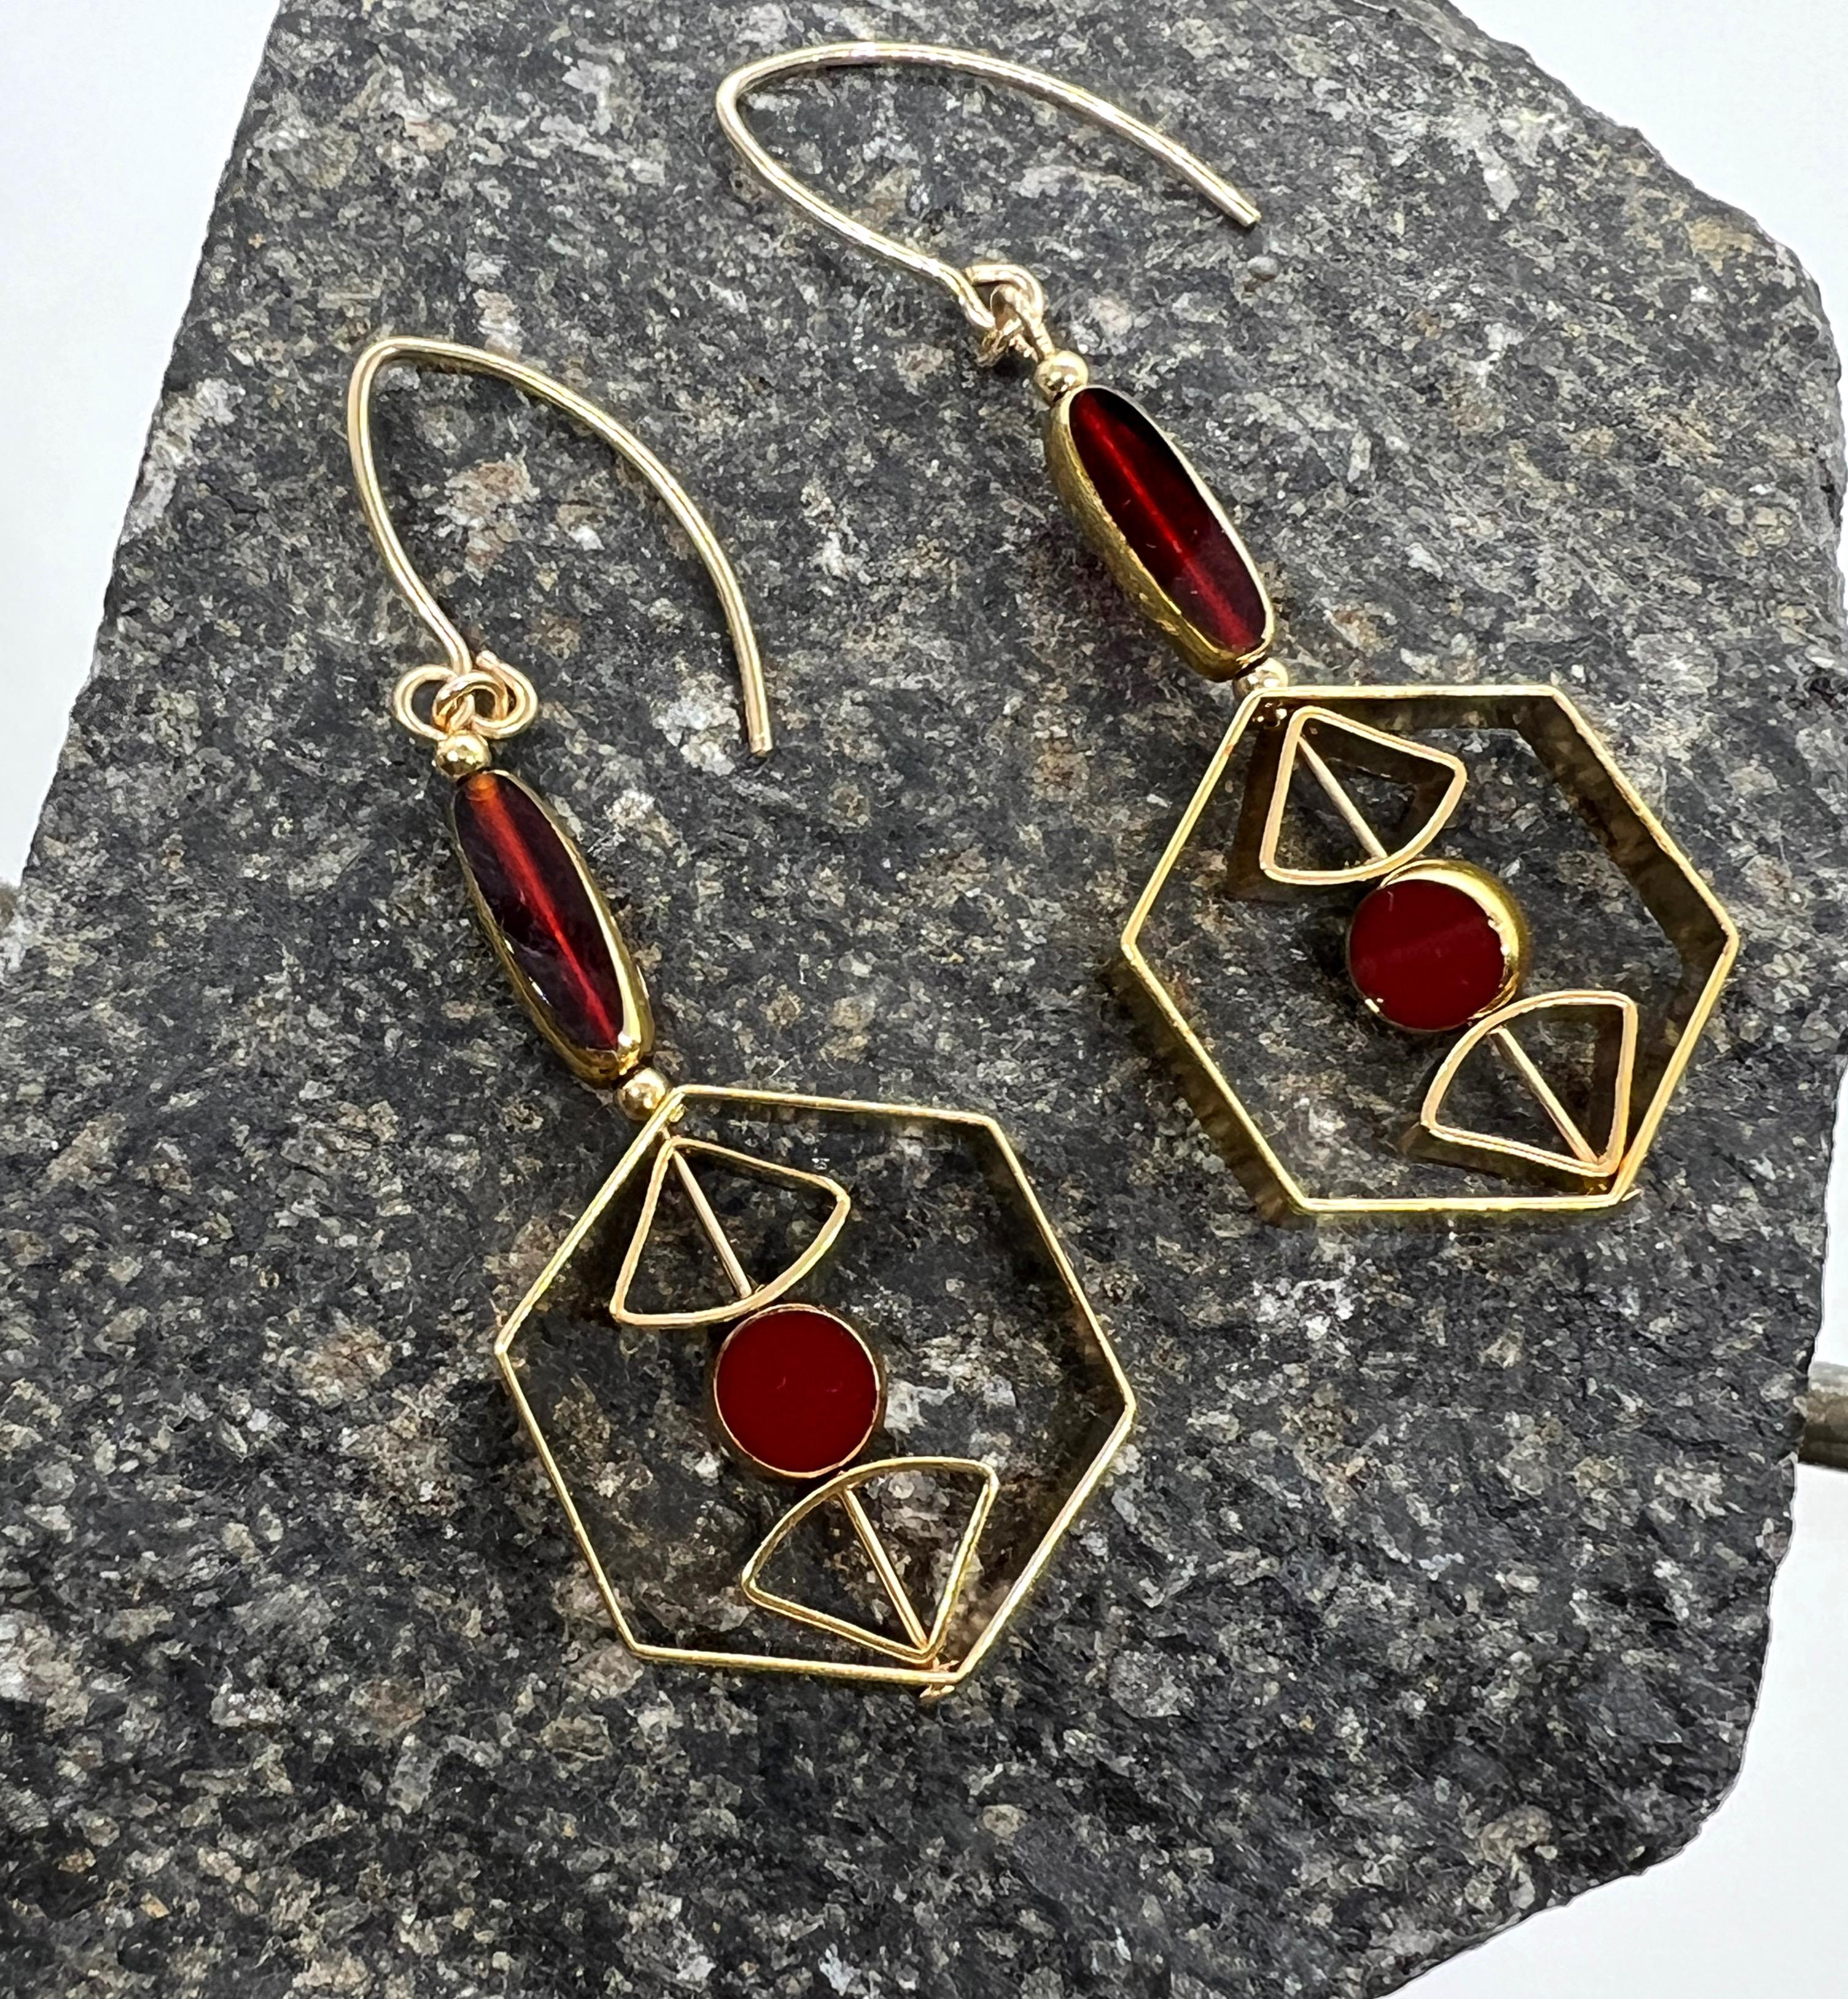 The earrings are light weight and are made to rotate and reposition with movement.
The earrings consist of a red burgundy mini circle and mini oblong shaped beads. They are new old stock vintage German glass beads that are framed with gold. The